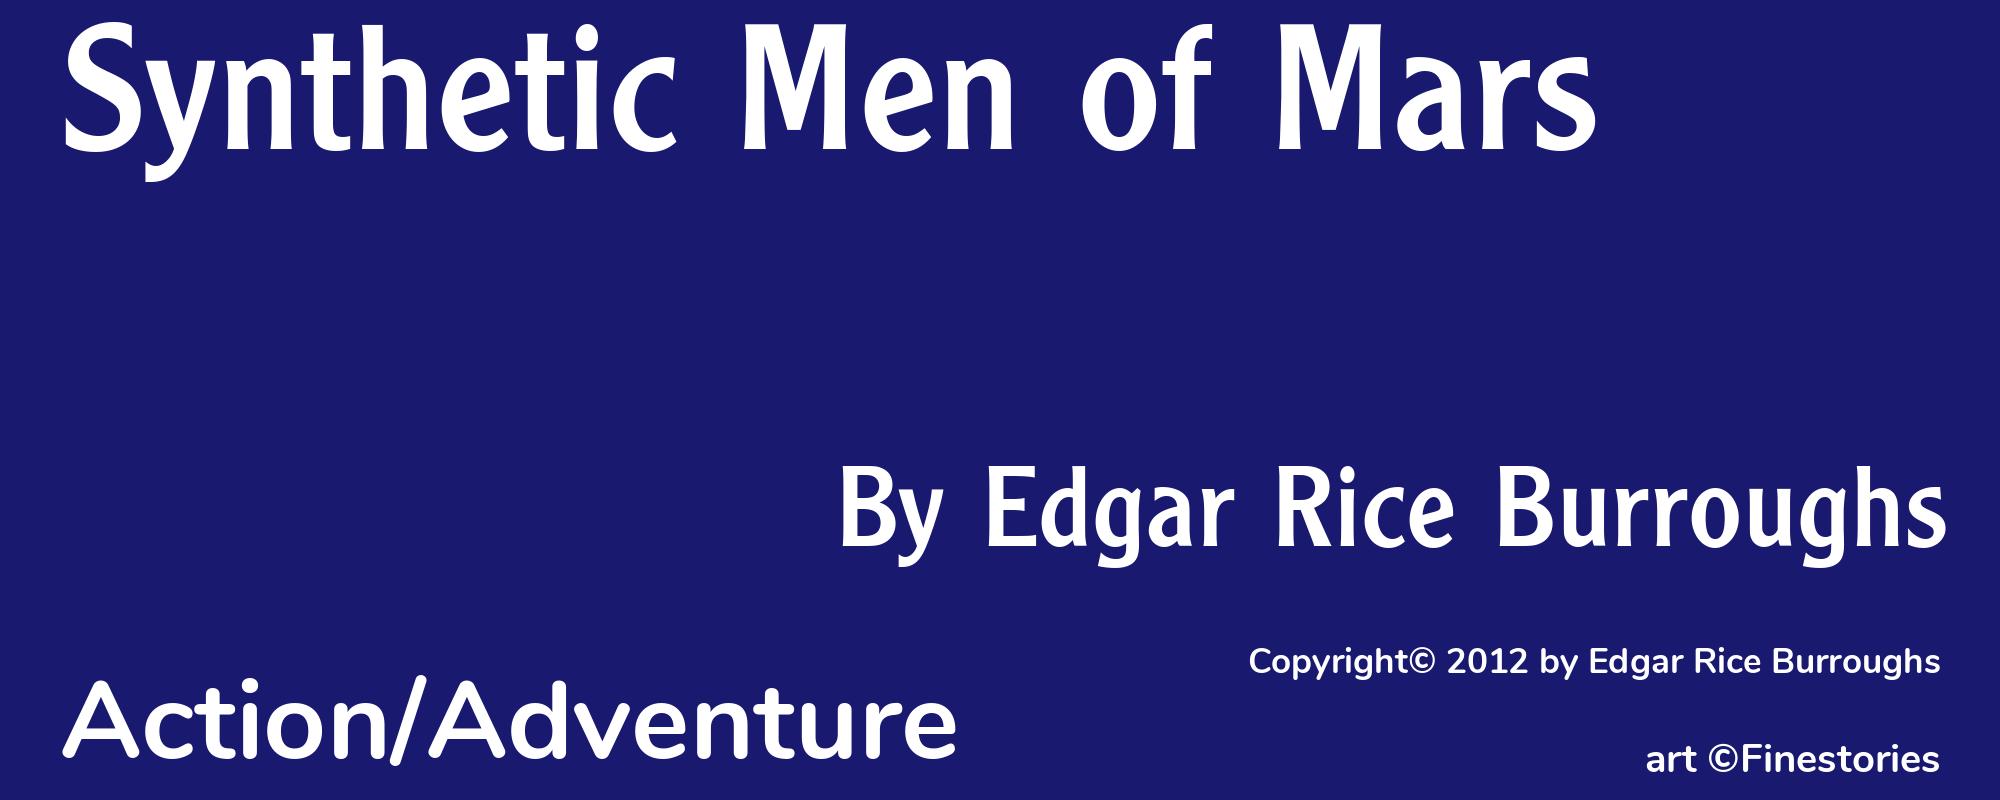 Synthetic Men of Mars - Cover